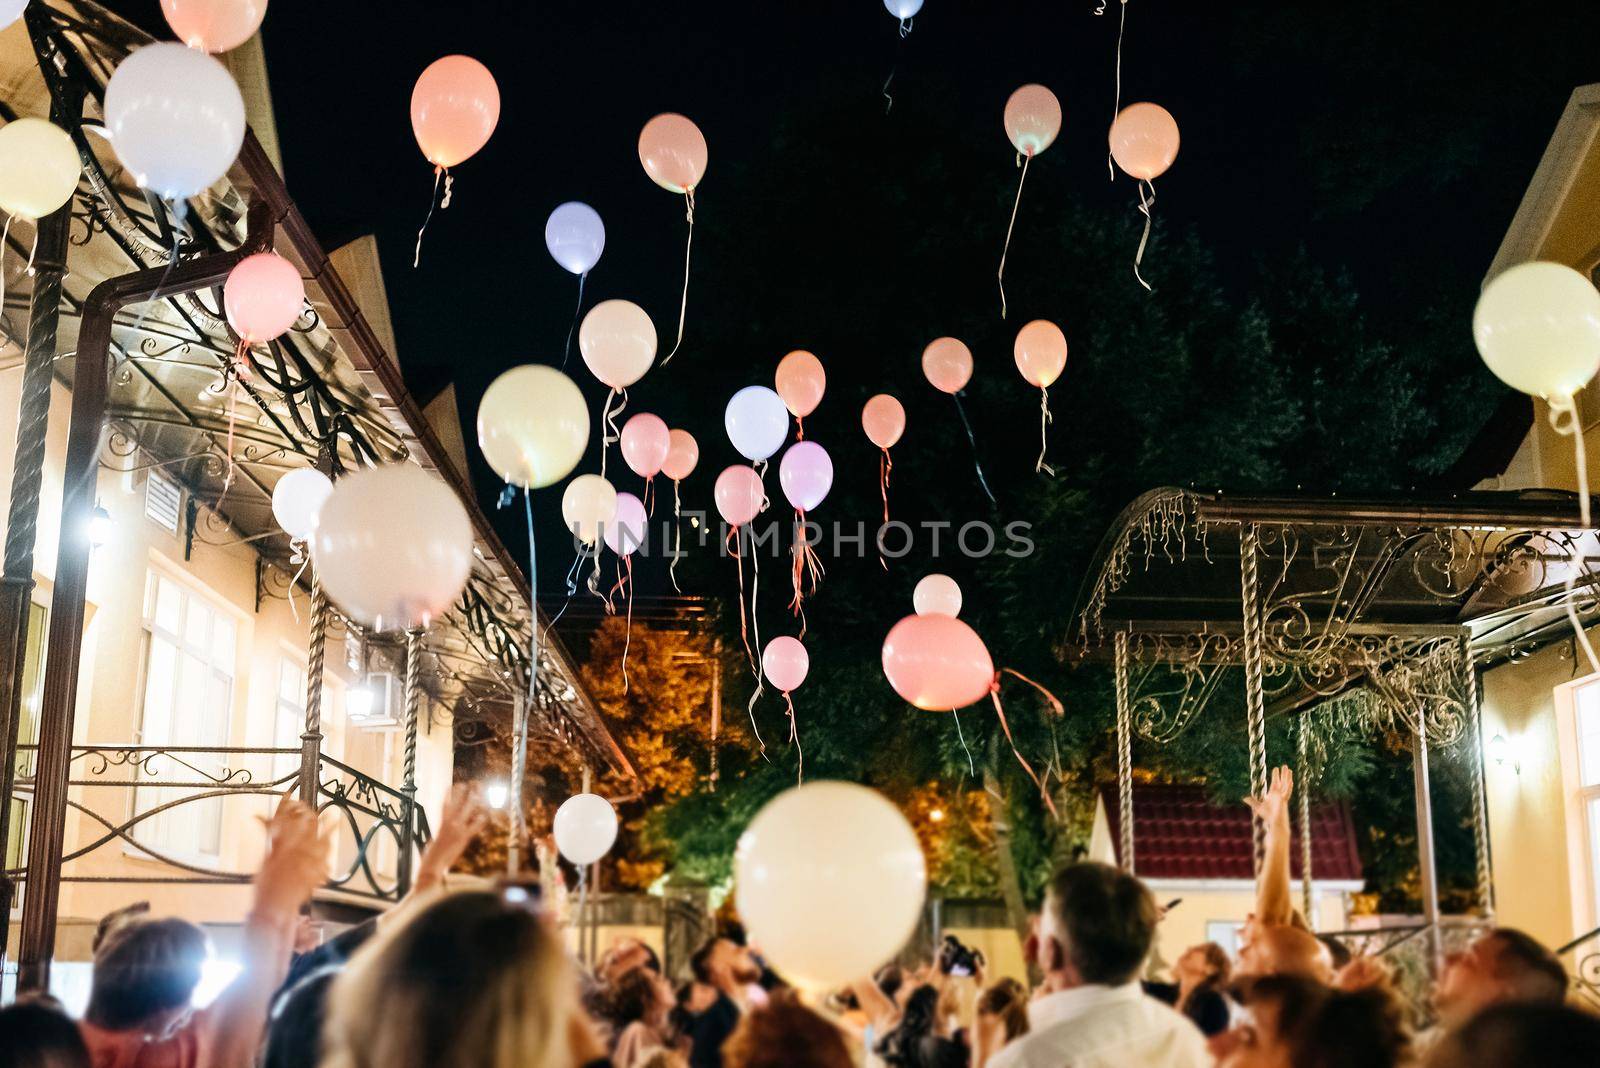 Crowd Throwing Colorful Balloons to Sky at night During Festival or wedding